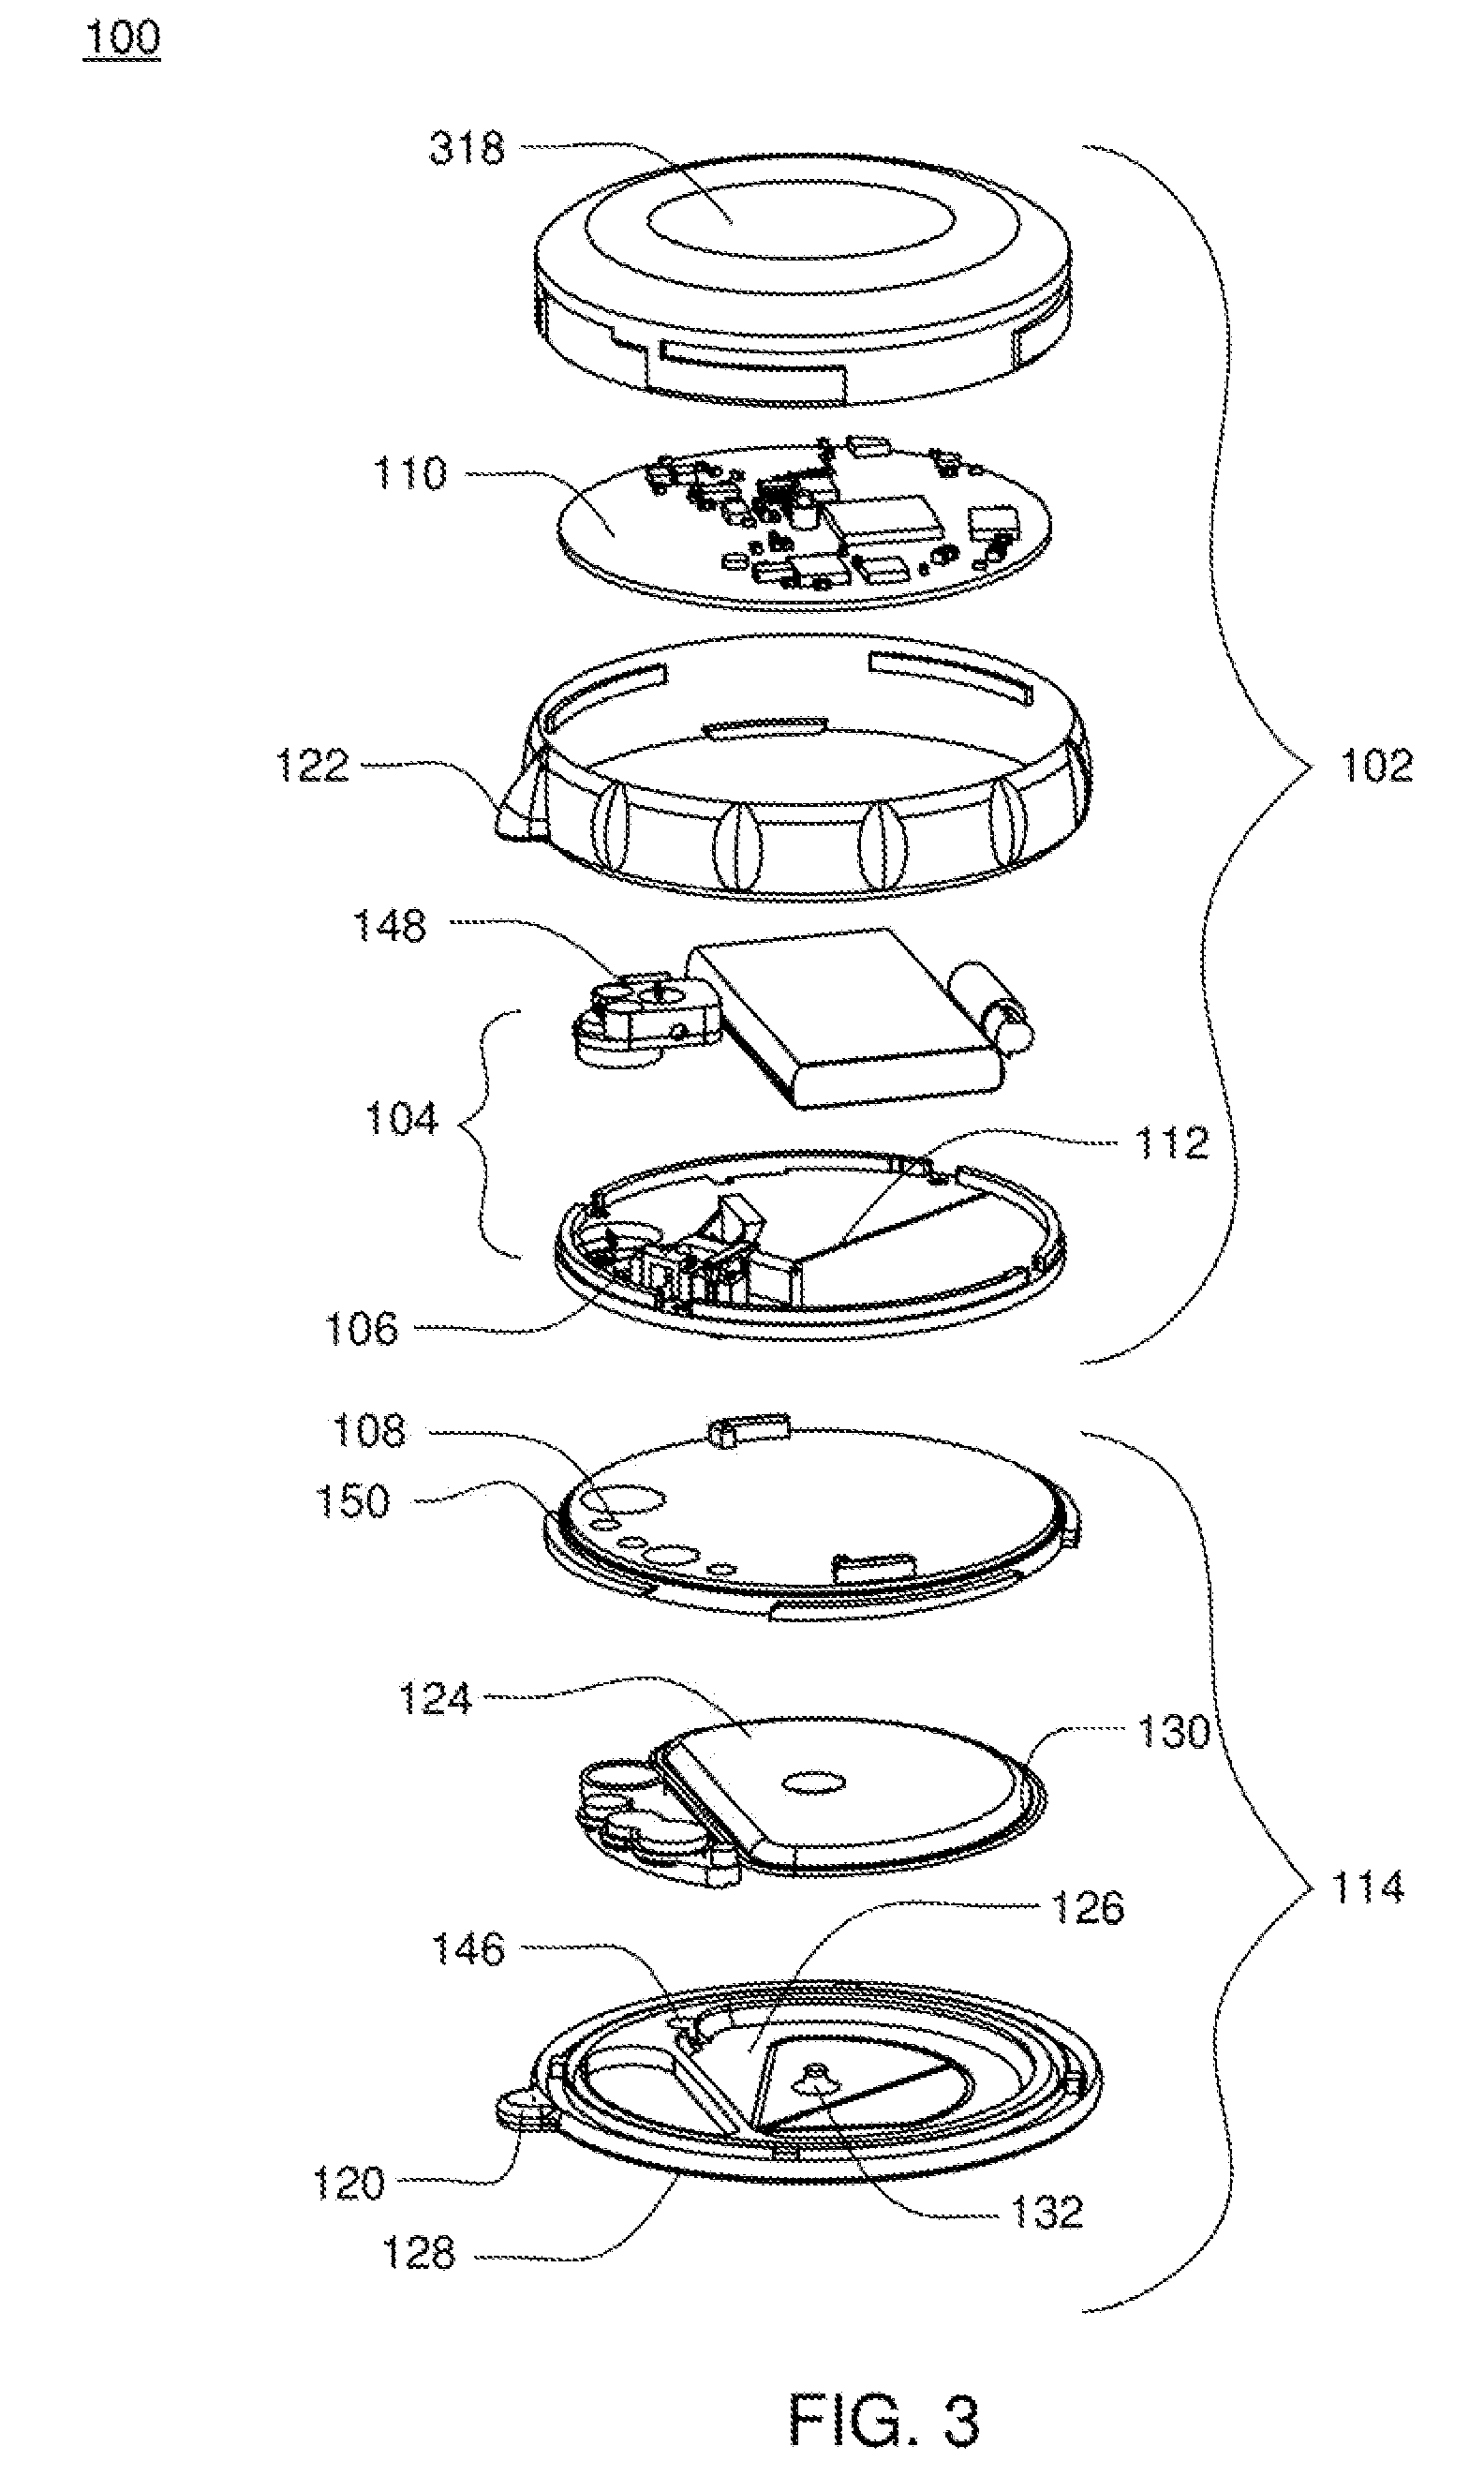 Split ring resonator antenna adapted for use in wirelessly controlled medical device